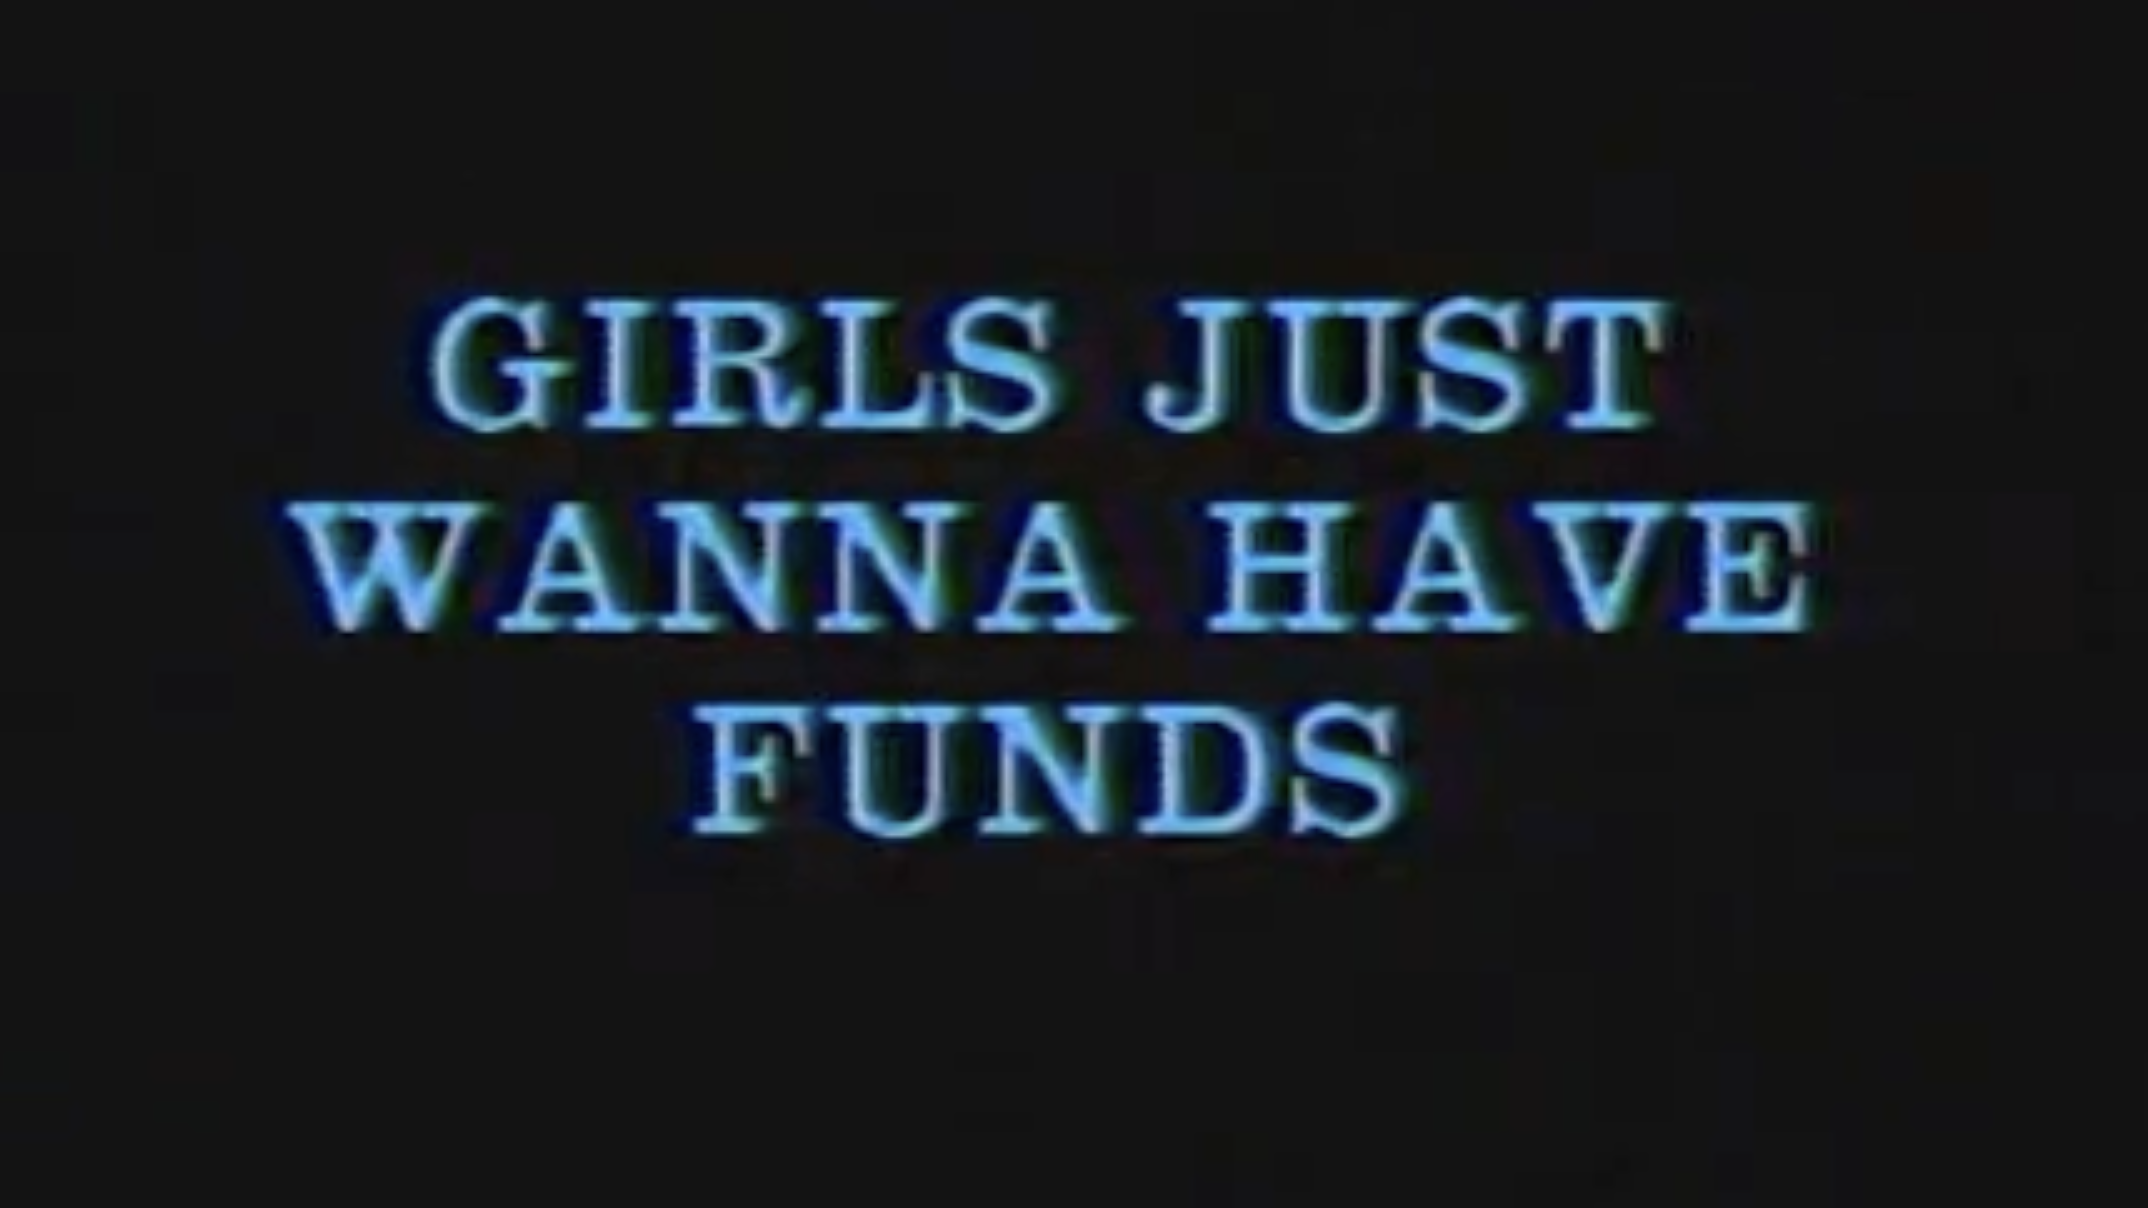 Girls Just Wanna Have Funds, Cathy Busby, Melodie Calvert, video, Halifax, 1987, 11:00 mins